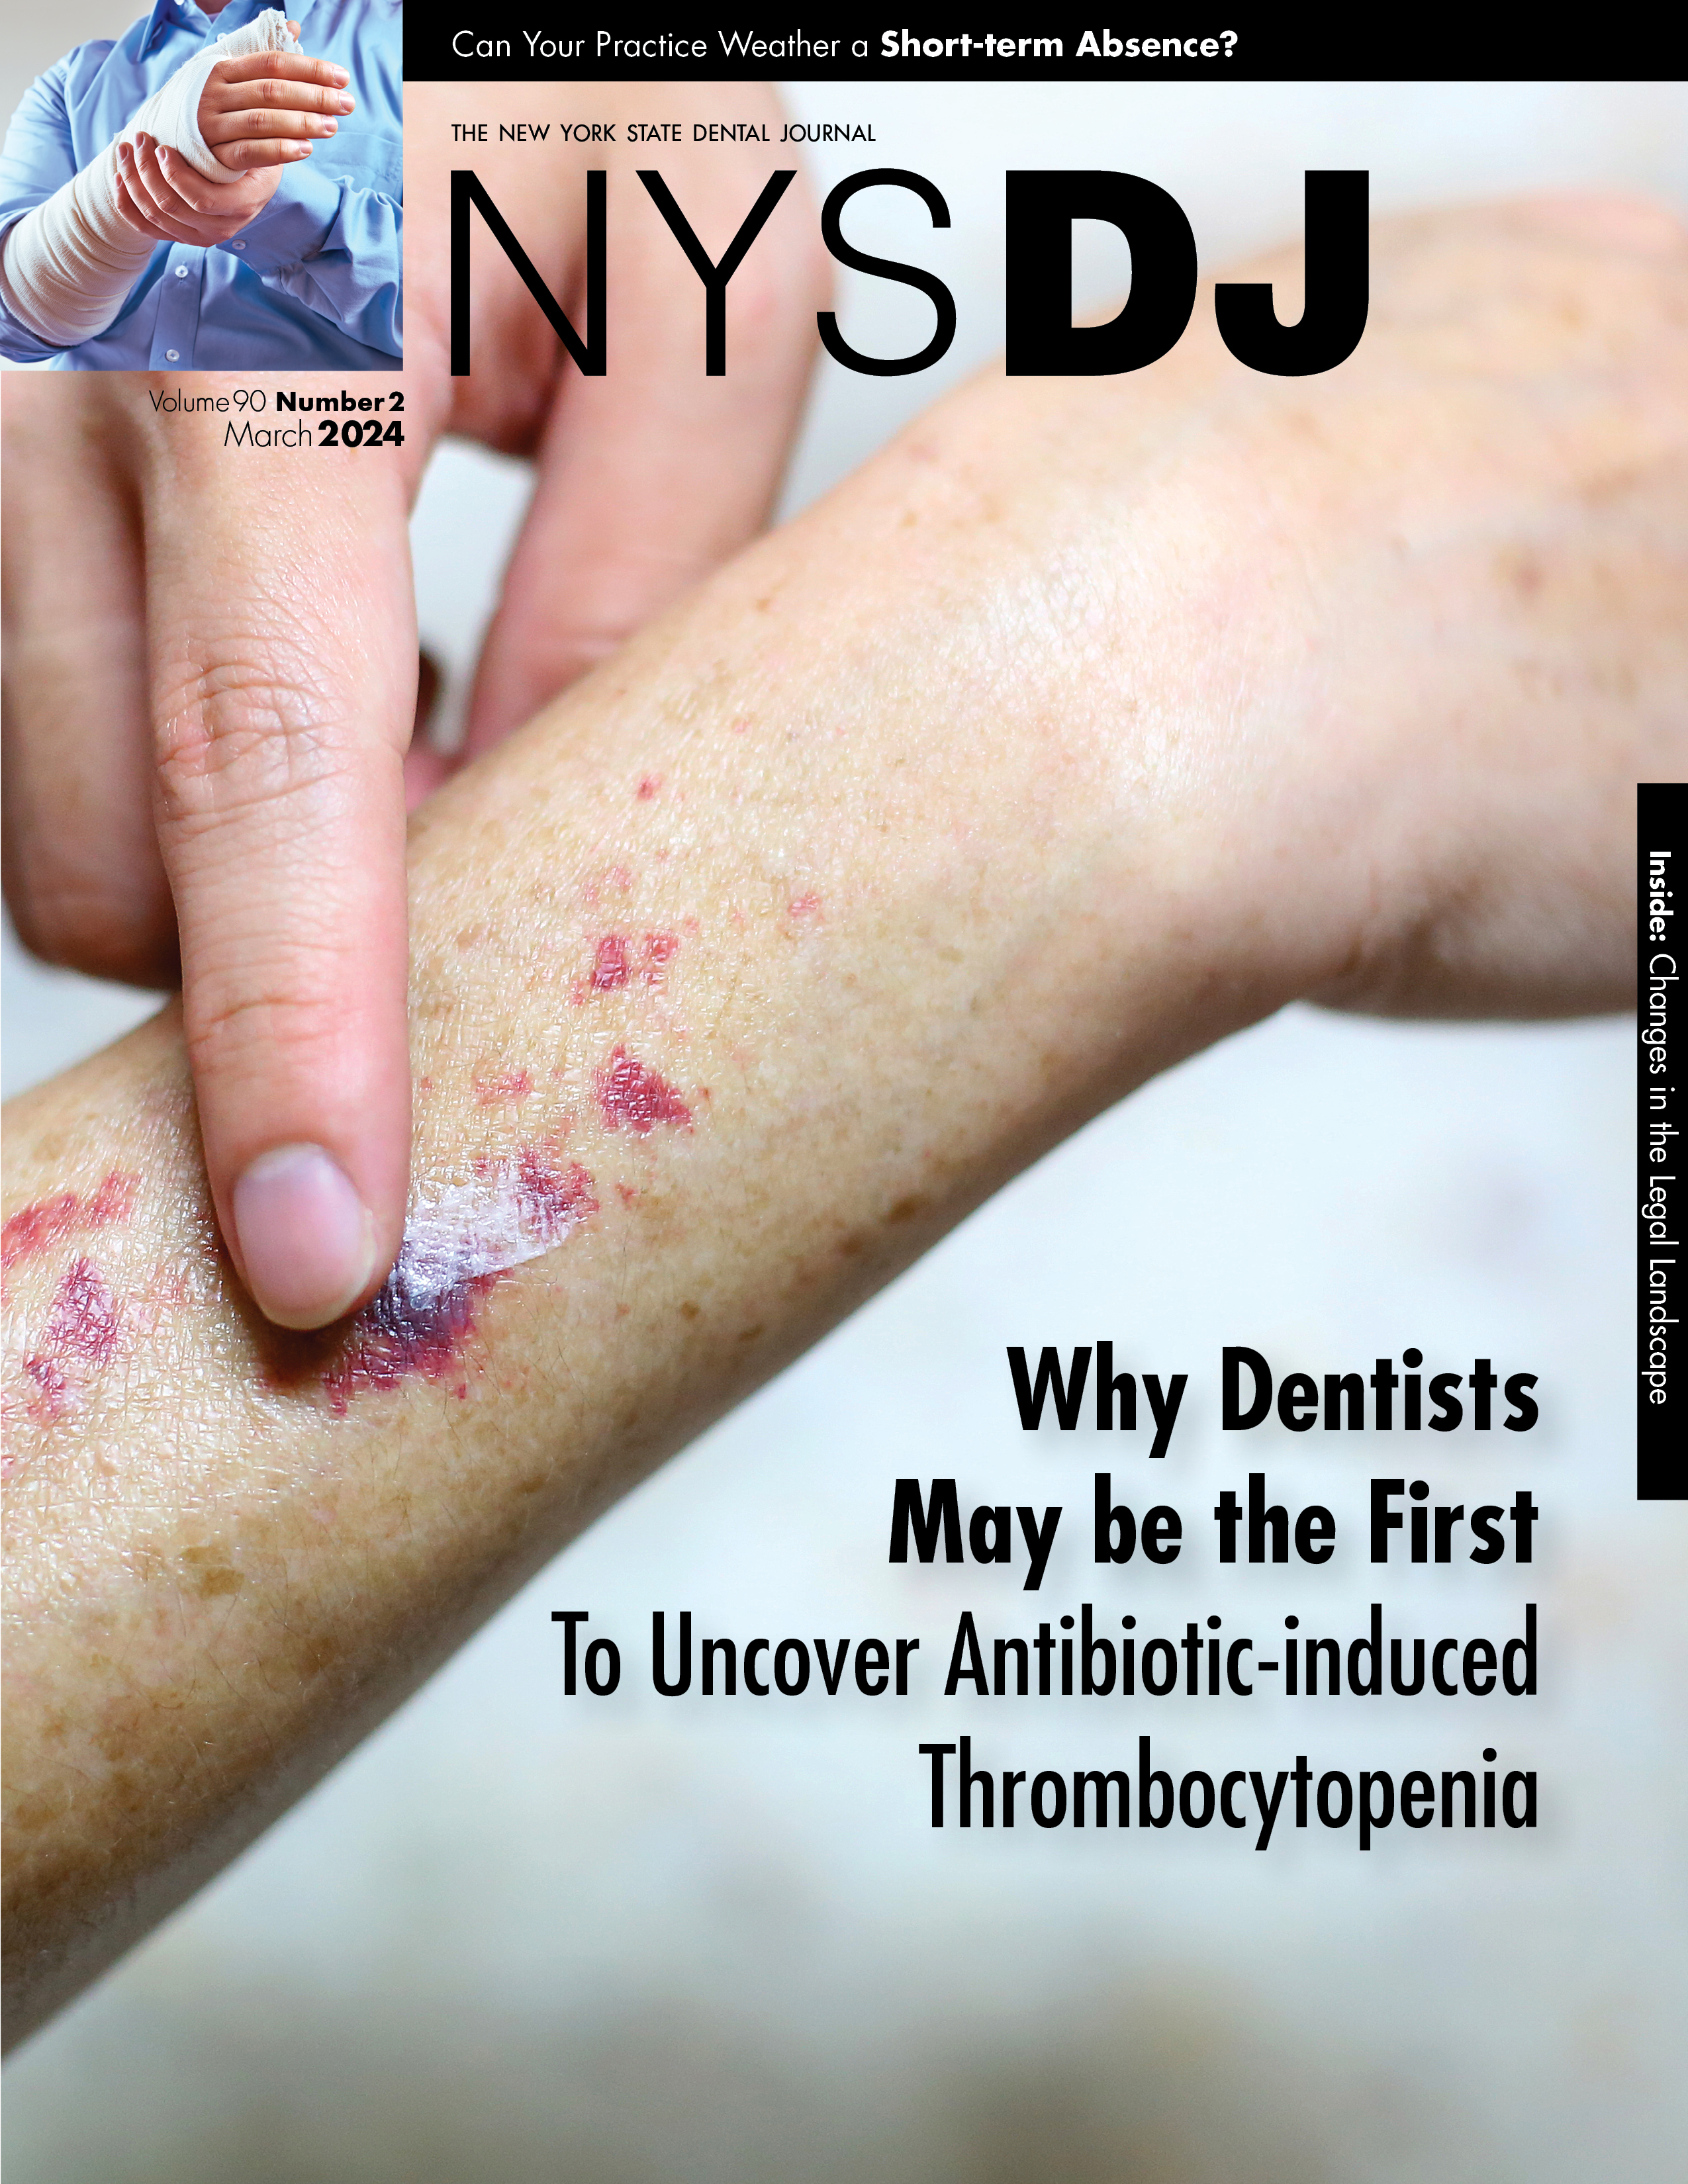 Cover of the NYSDJ with an unwrinkled hand applying clear salve to an older, blood-spotted arm.